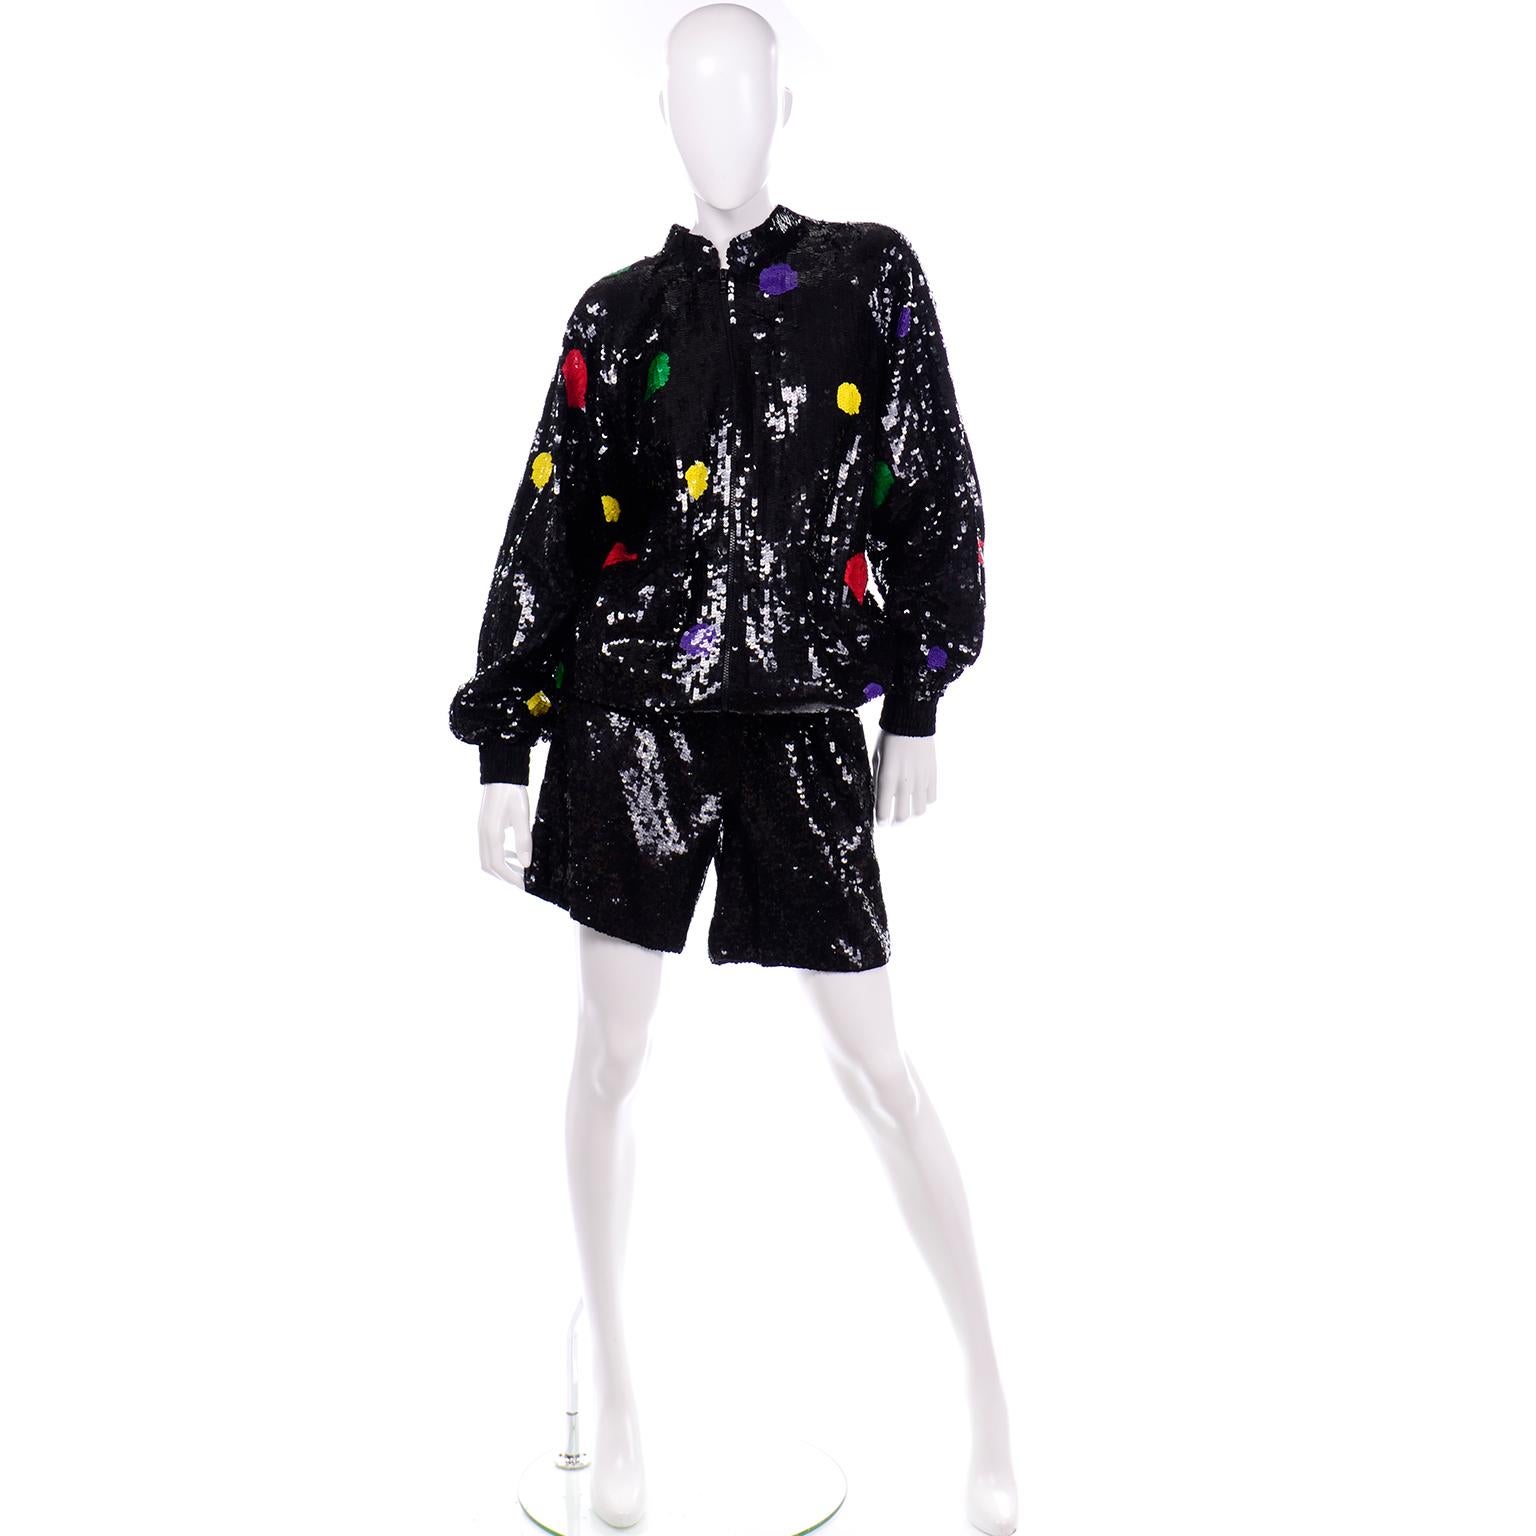 This is a show stopping vintage 1980's Lillie Rubin short set that includes a pair of elastic waist shorts and a sweatshirt style zip front jacket. The base color of both pieces is black and the jacket has sequin polka dots in bold shades of 